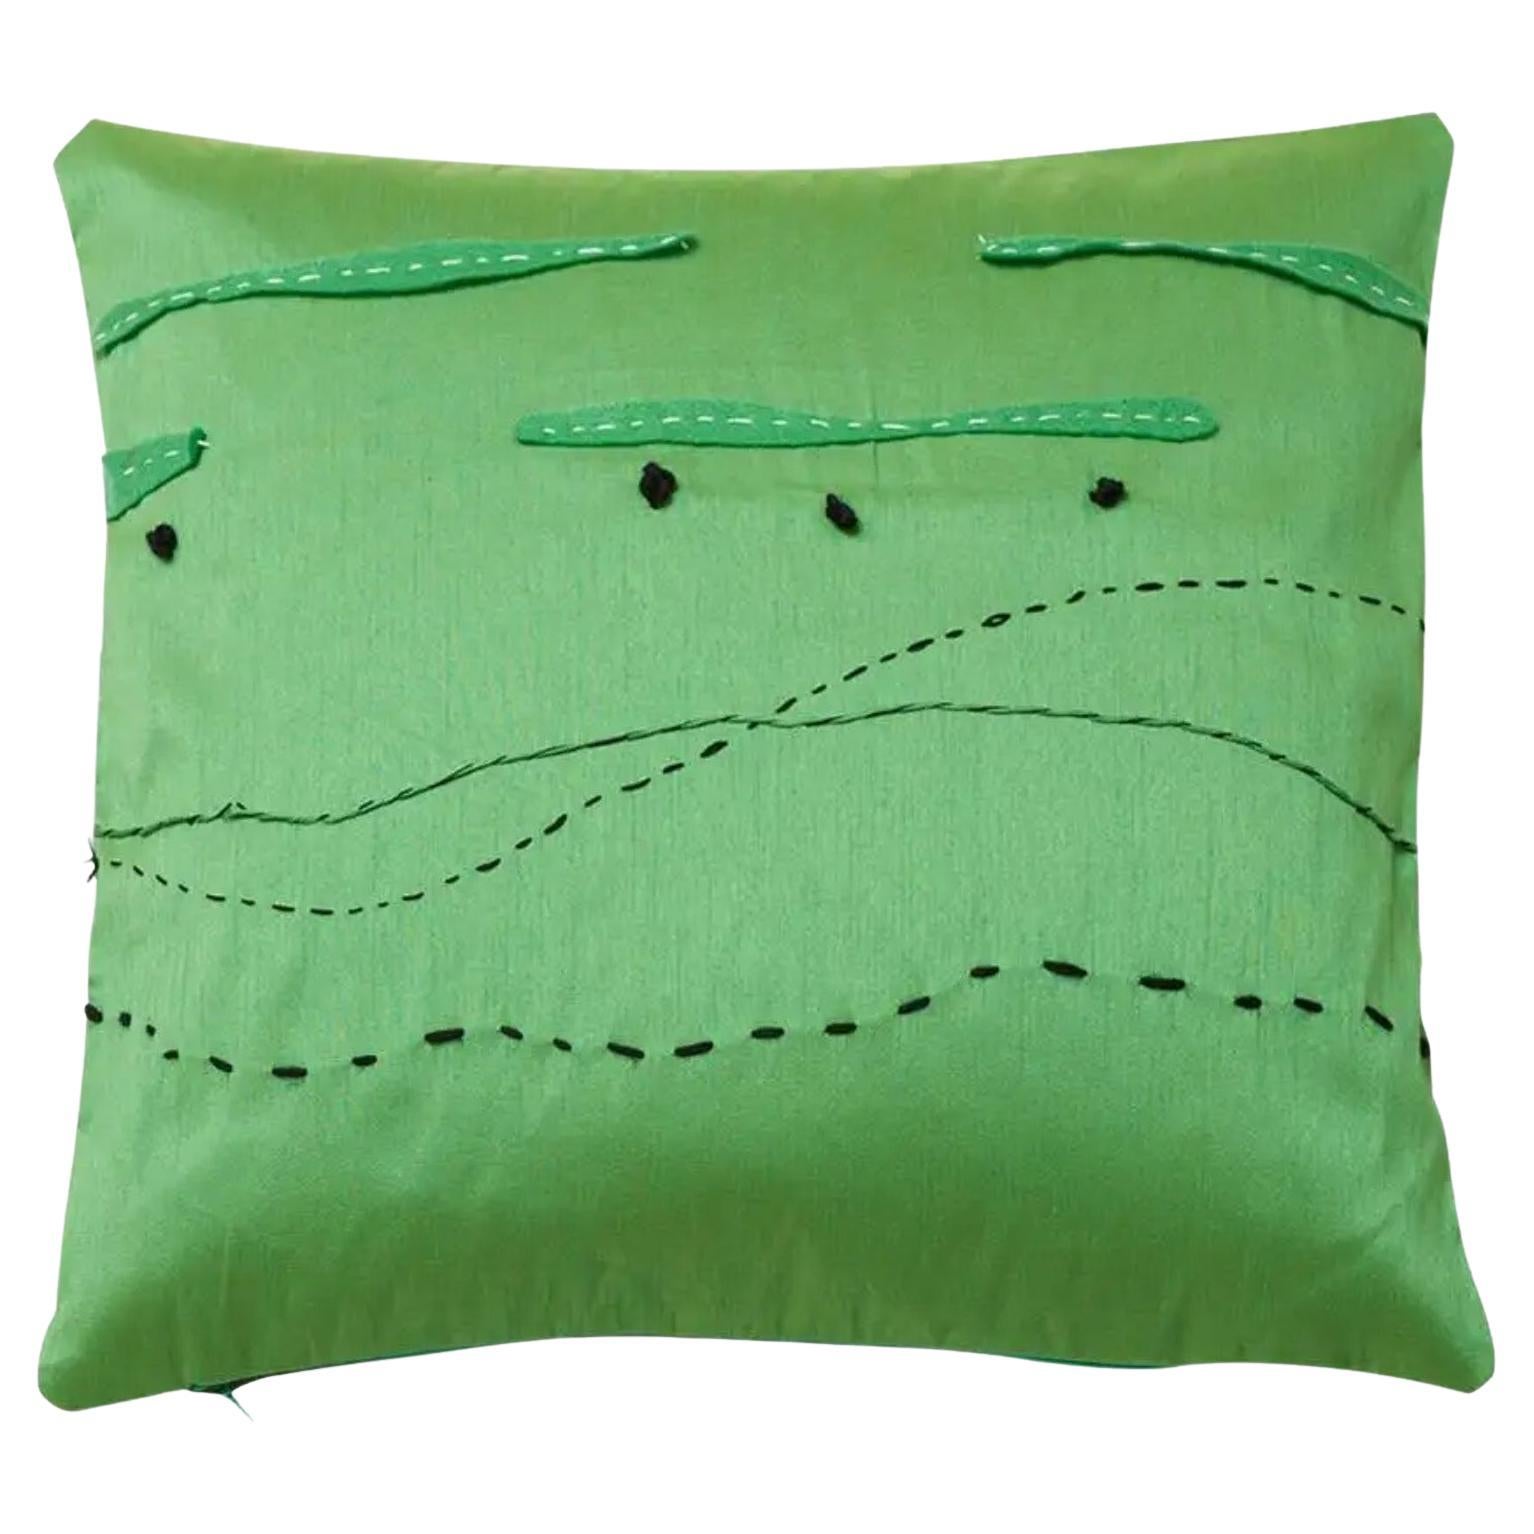 Sora Pillow, Apple Green, Maki Yamamoto, Represented by Tuleste Factory For Sale